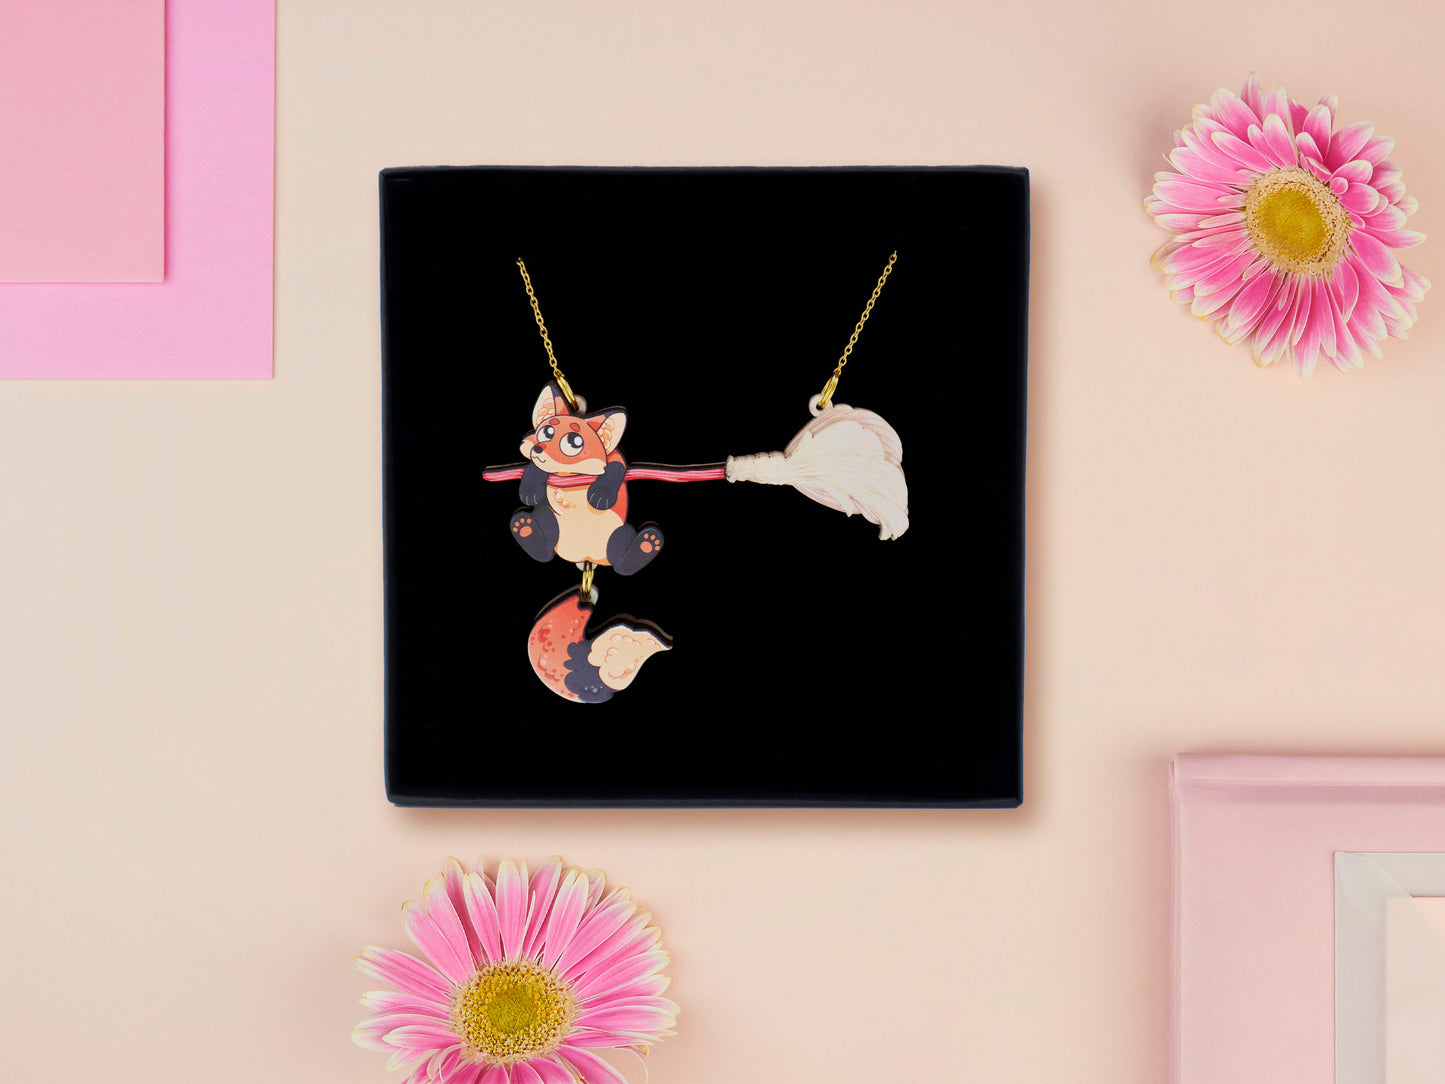 Mixed material handmade necklace of chibi cartoon Fox hanging on to a pearlescent witches broomstick, with a gold chain and black gift box.